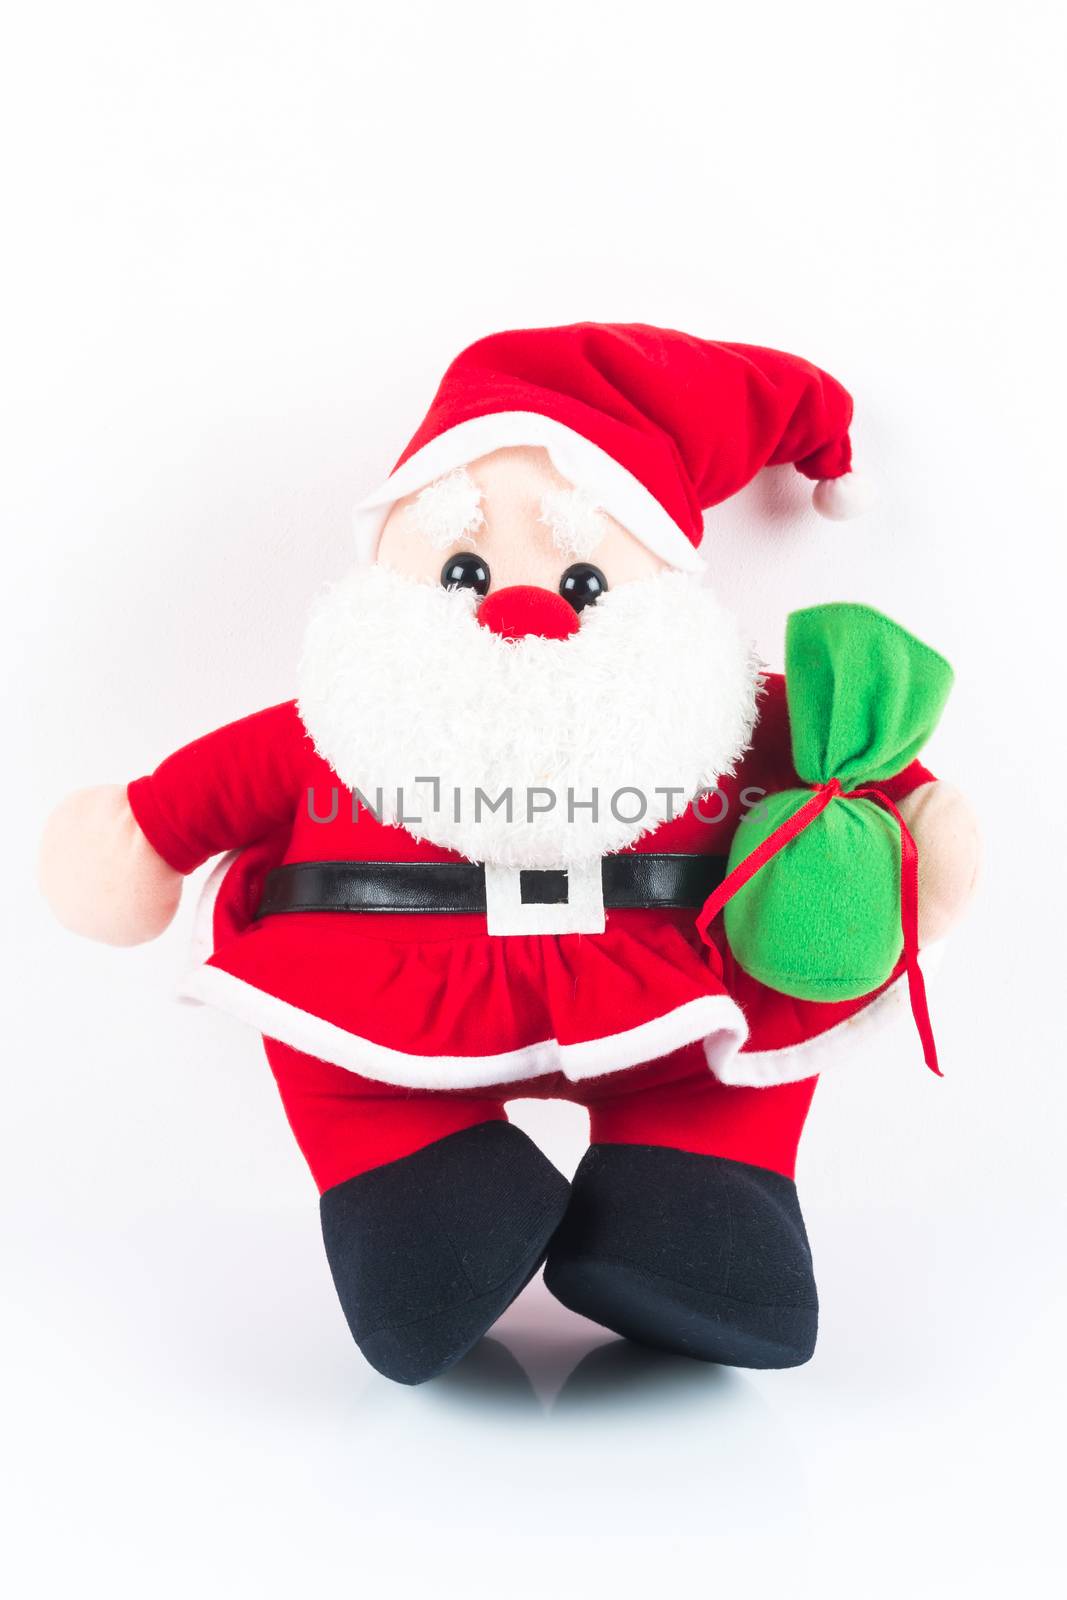 Santa Claus doll with green sack on white background